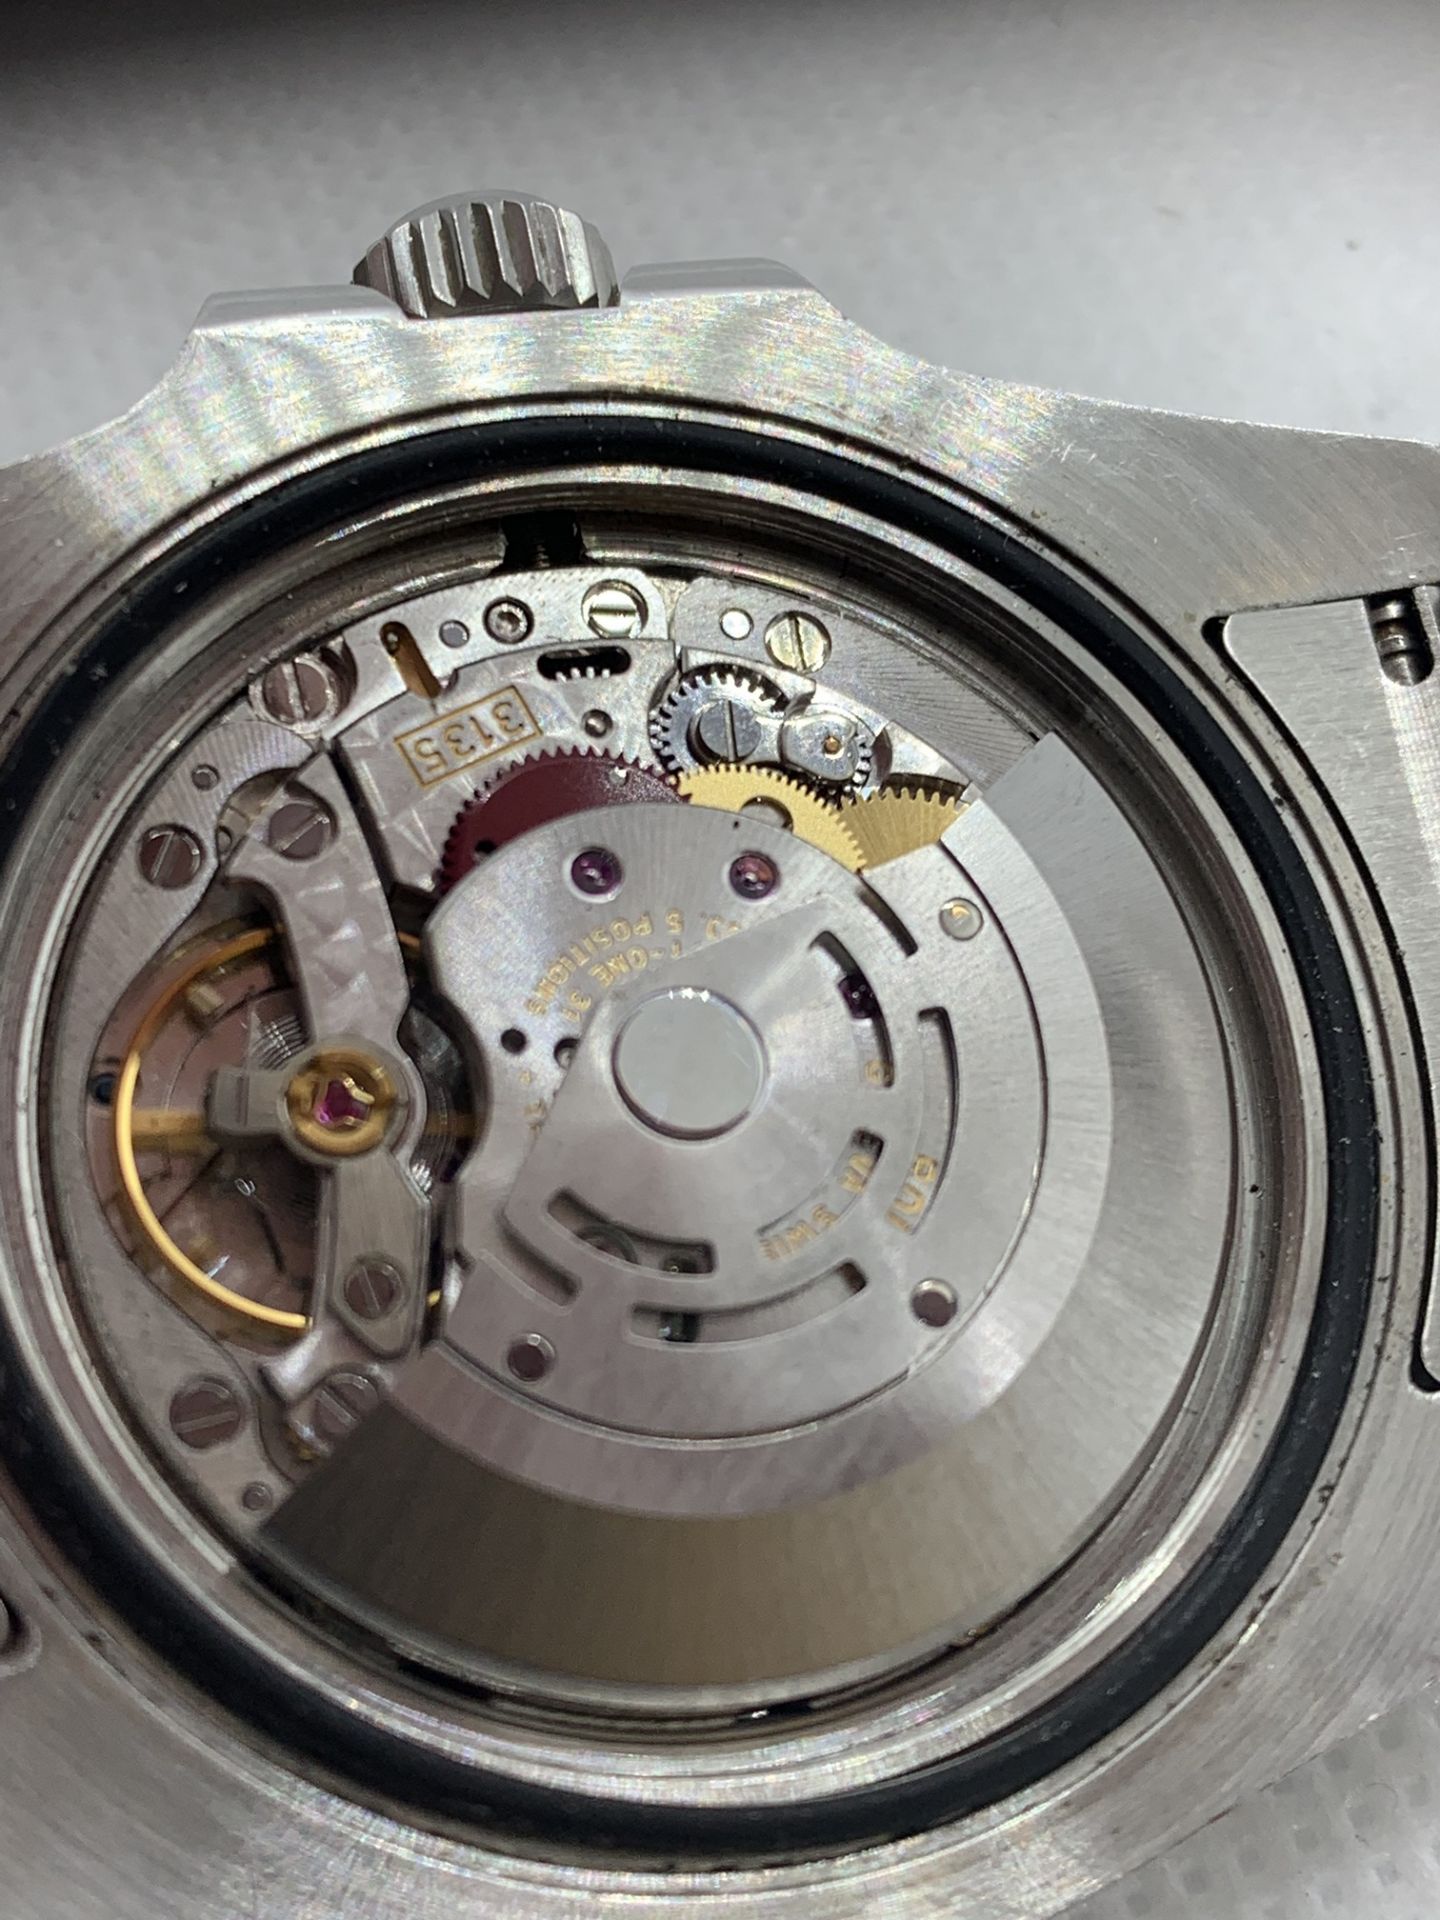 ROLEX SUBMARINER 3135 MOVEMENT WITH S/S METAL WATCH CASE - Image 13 of 13